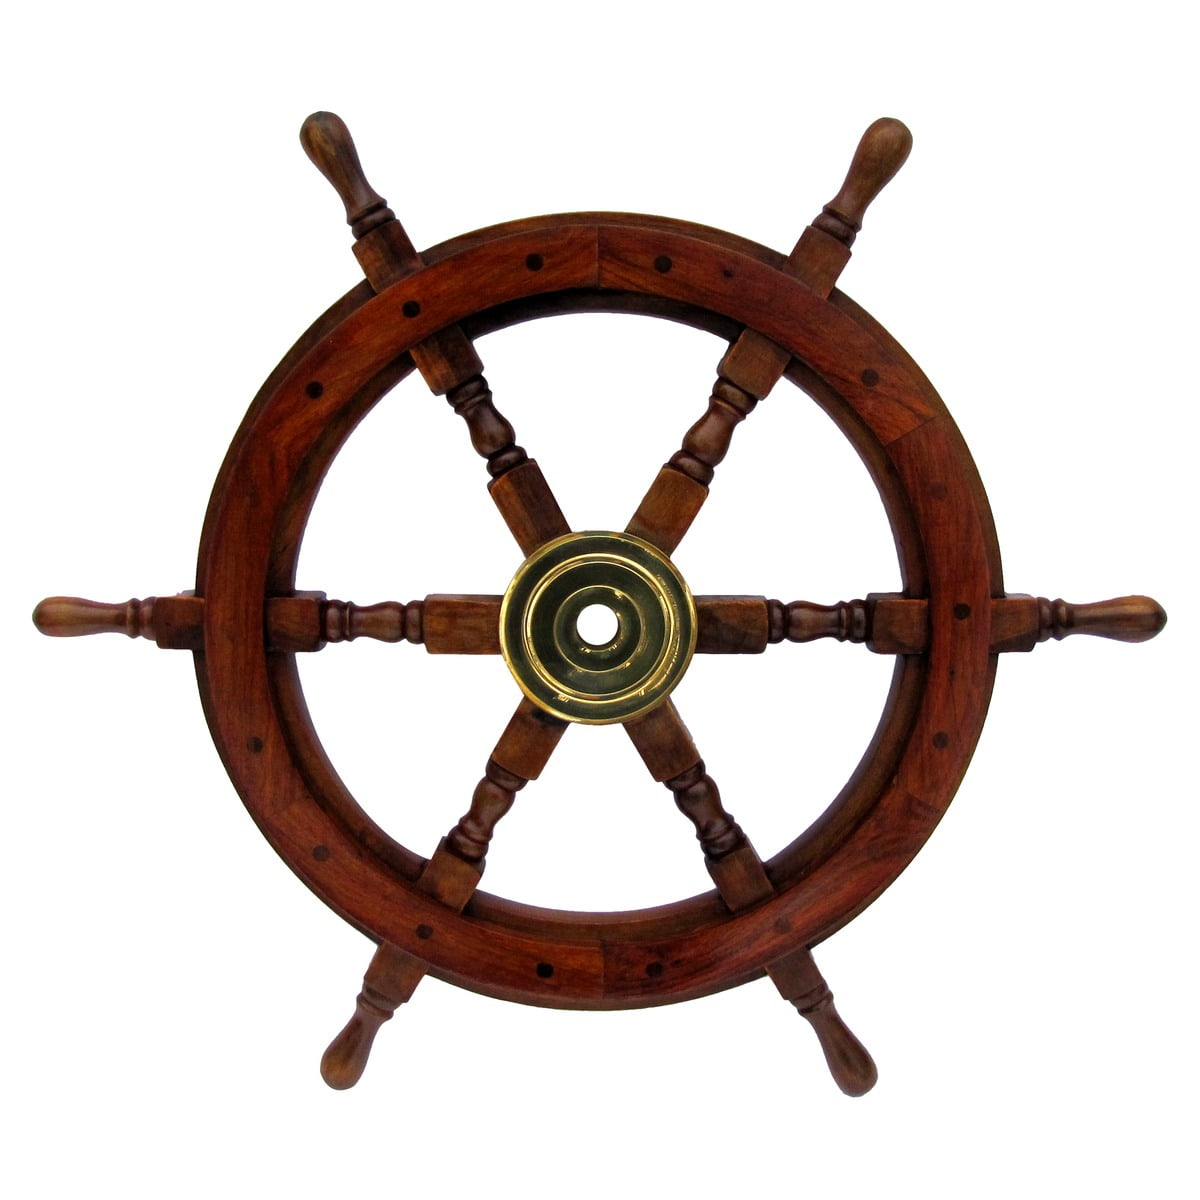 Wall Decals for kids Wooden Ship Wheel Wall Decal Play Room or Beach House. Personalized Steering Wheel for Sailboat Bedroom